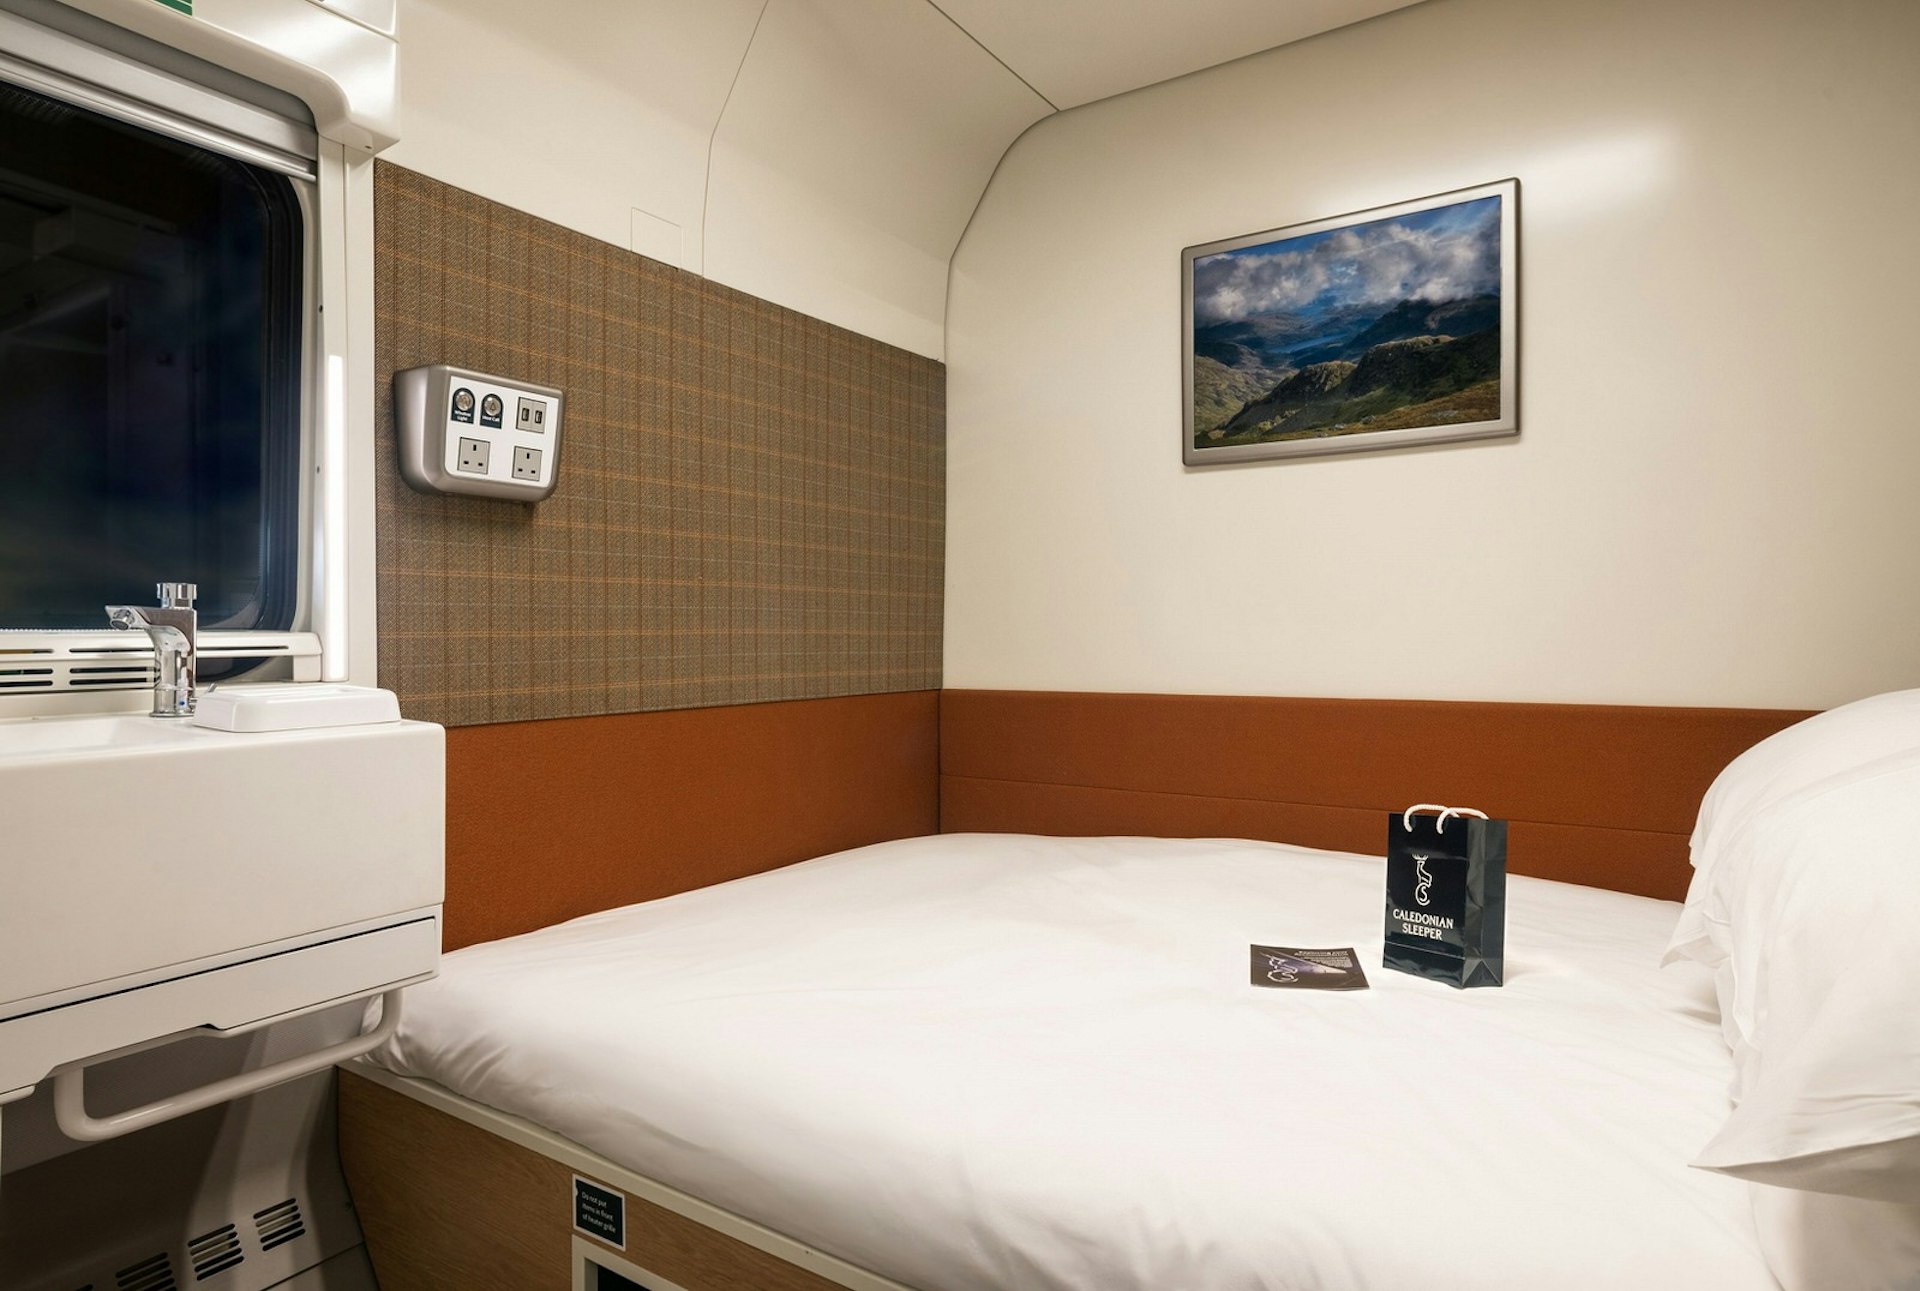 The interior of a double cabin on the Caledonian Sleeper, with sink and large double bed visible